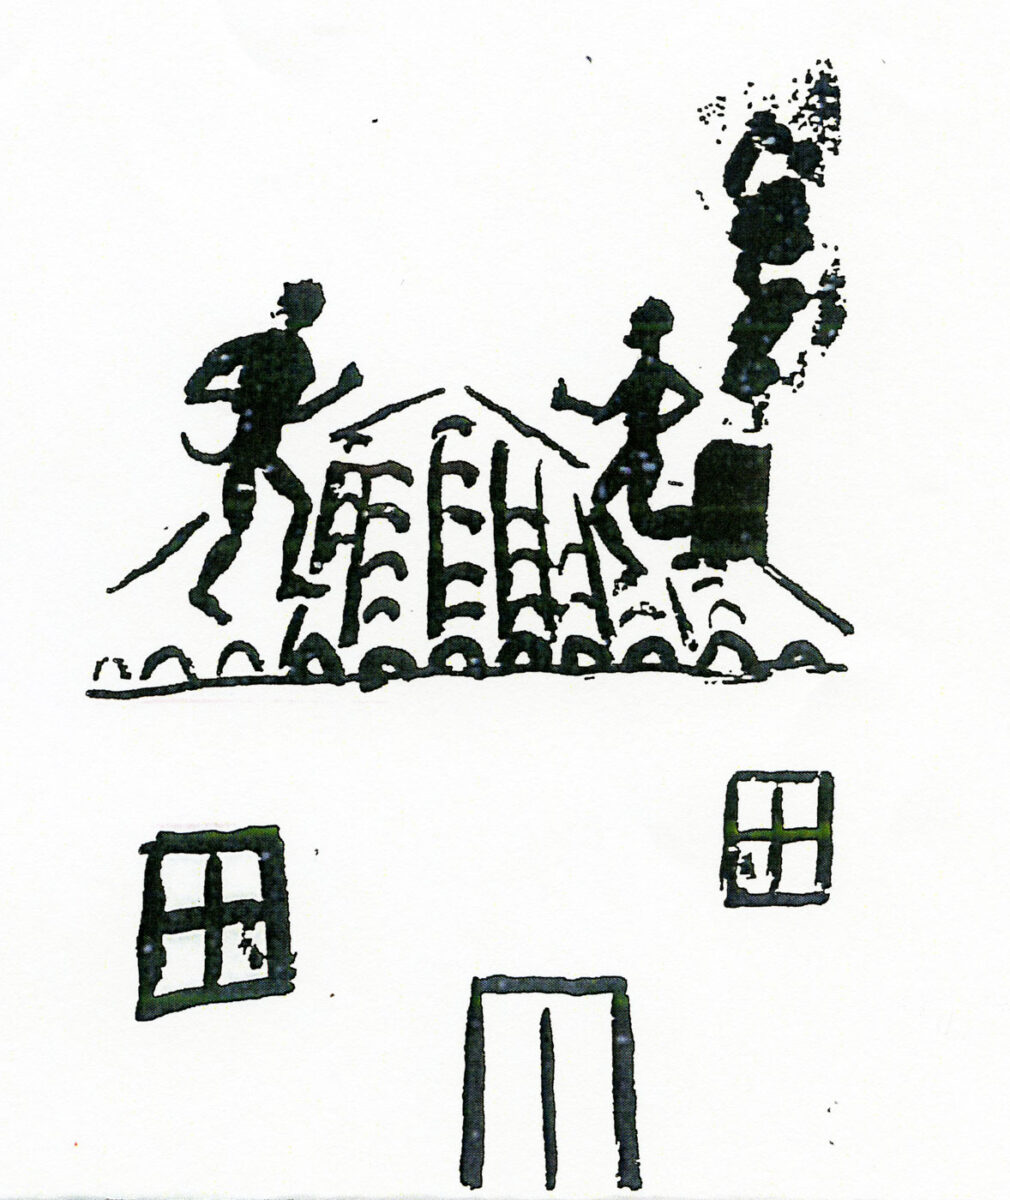 Fig.2. Goblins on the tiled roof of a house (drawing by Panos Feidakis, published in the book “Kalikantzaroi”, Foinikas publications, Athens 2008.